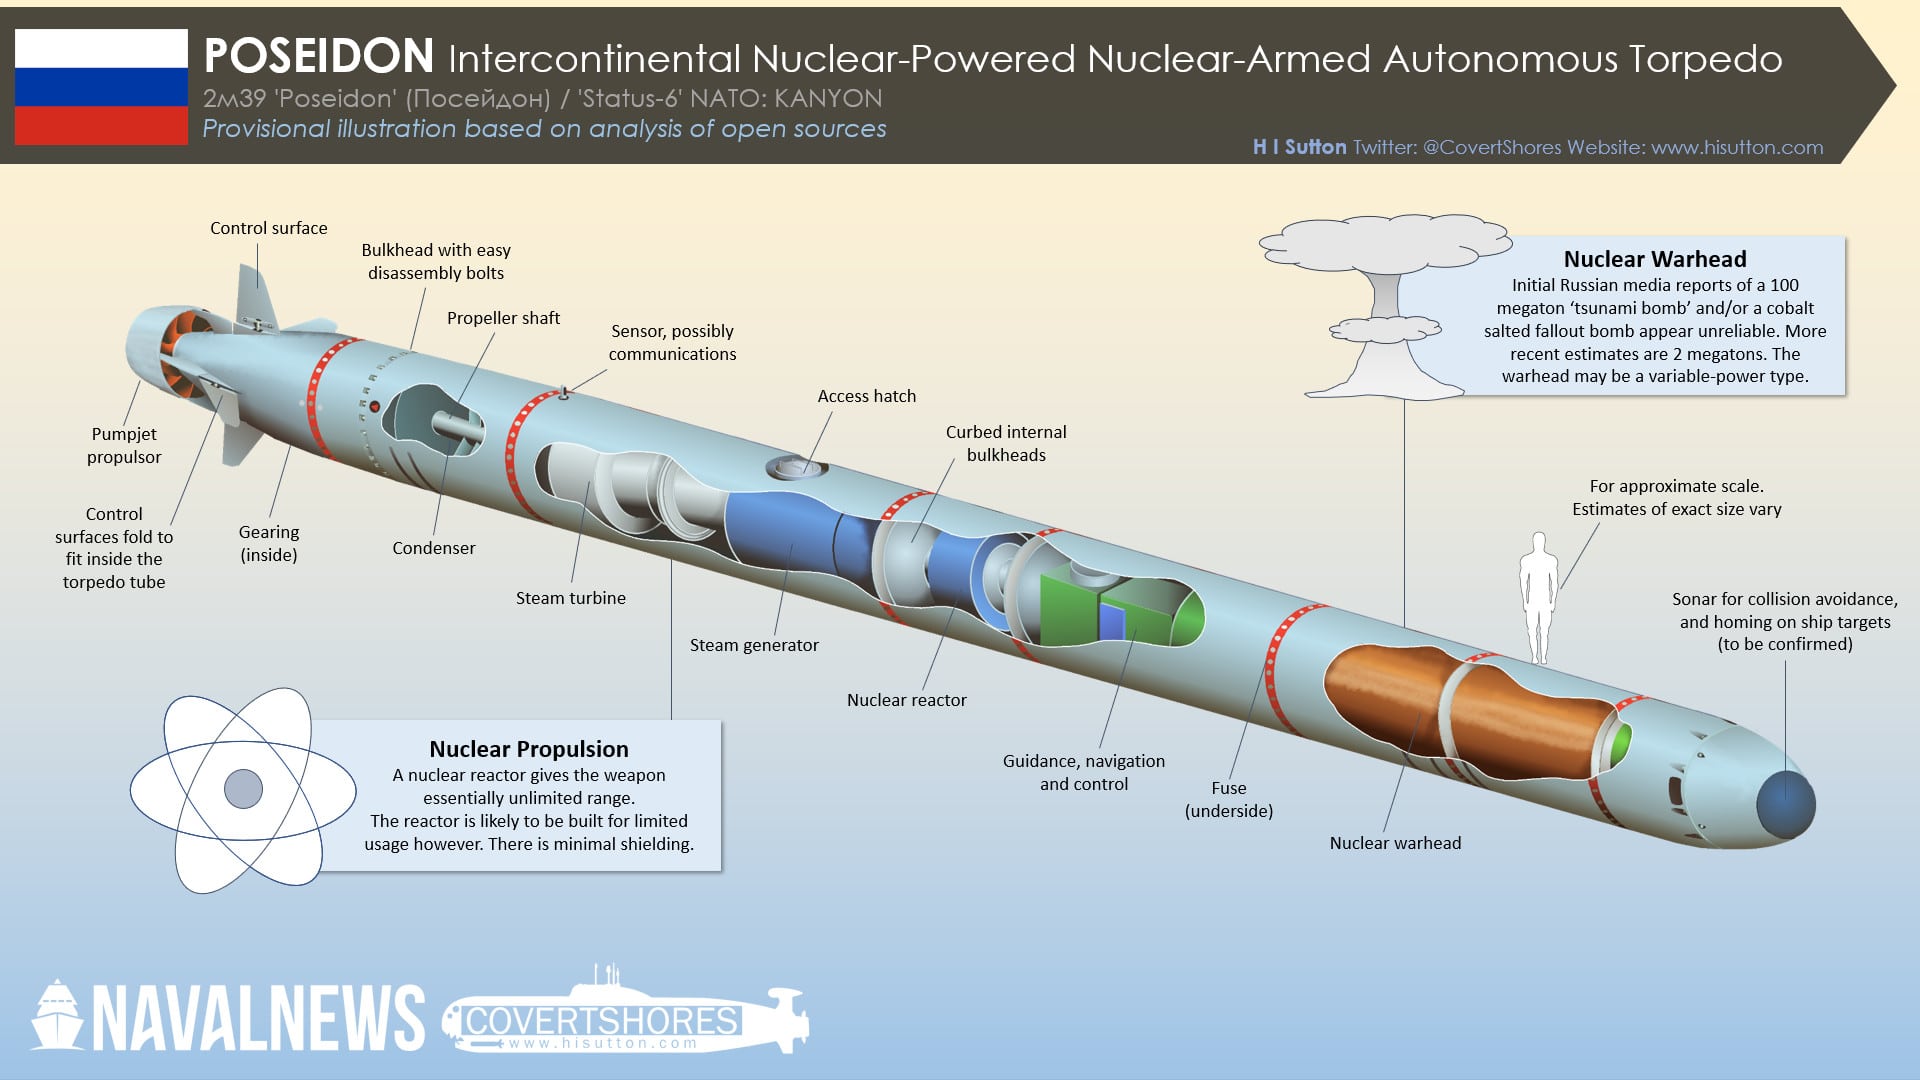 Analysis: What is Russia's policy on tactical nuclear weapons